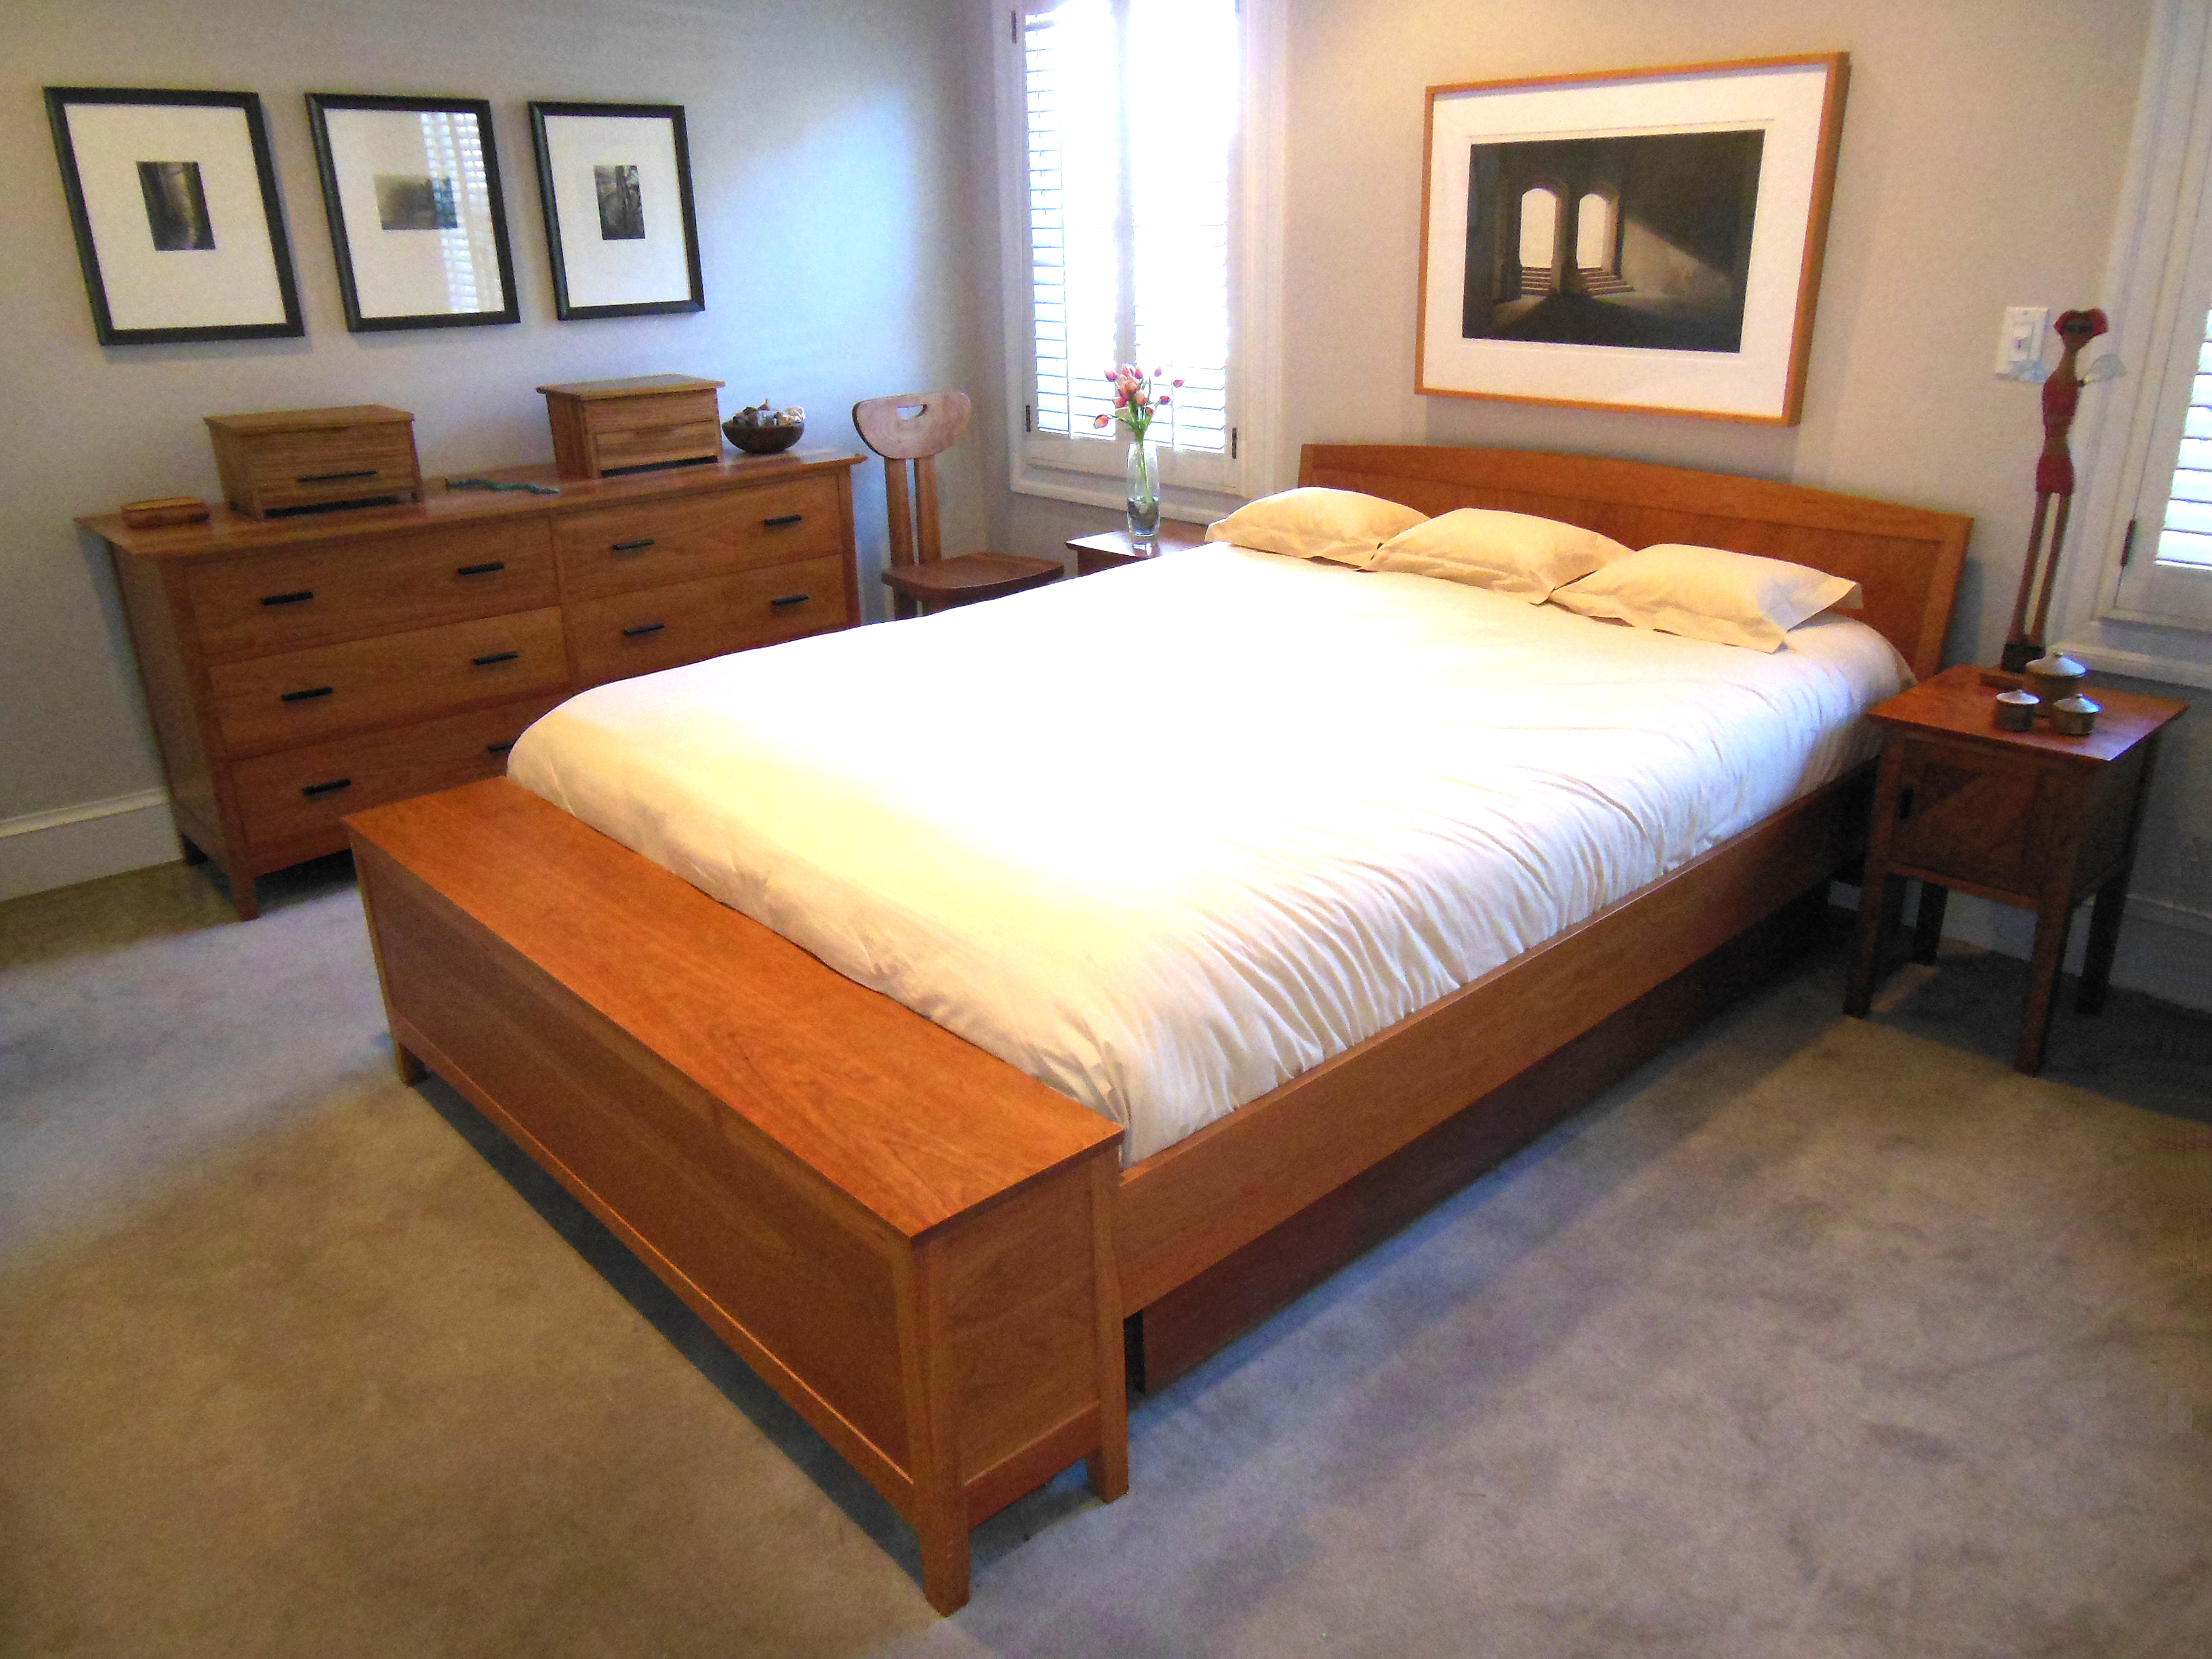  wood construction, dovetail joinery drawers, and blanket chest with